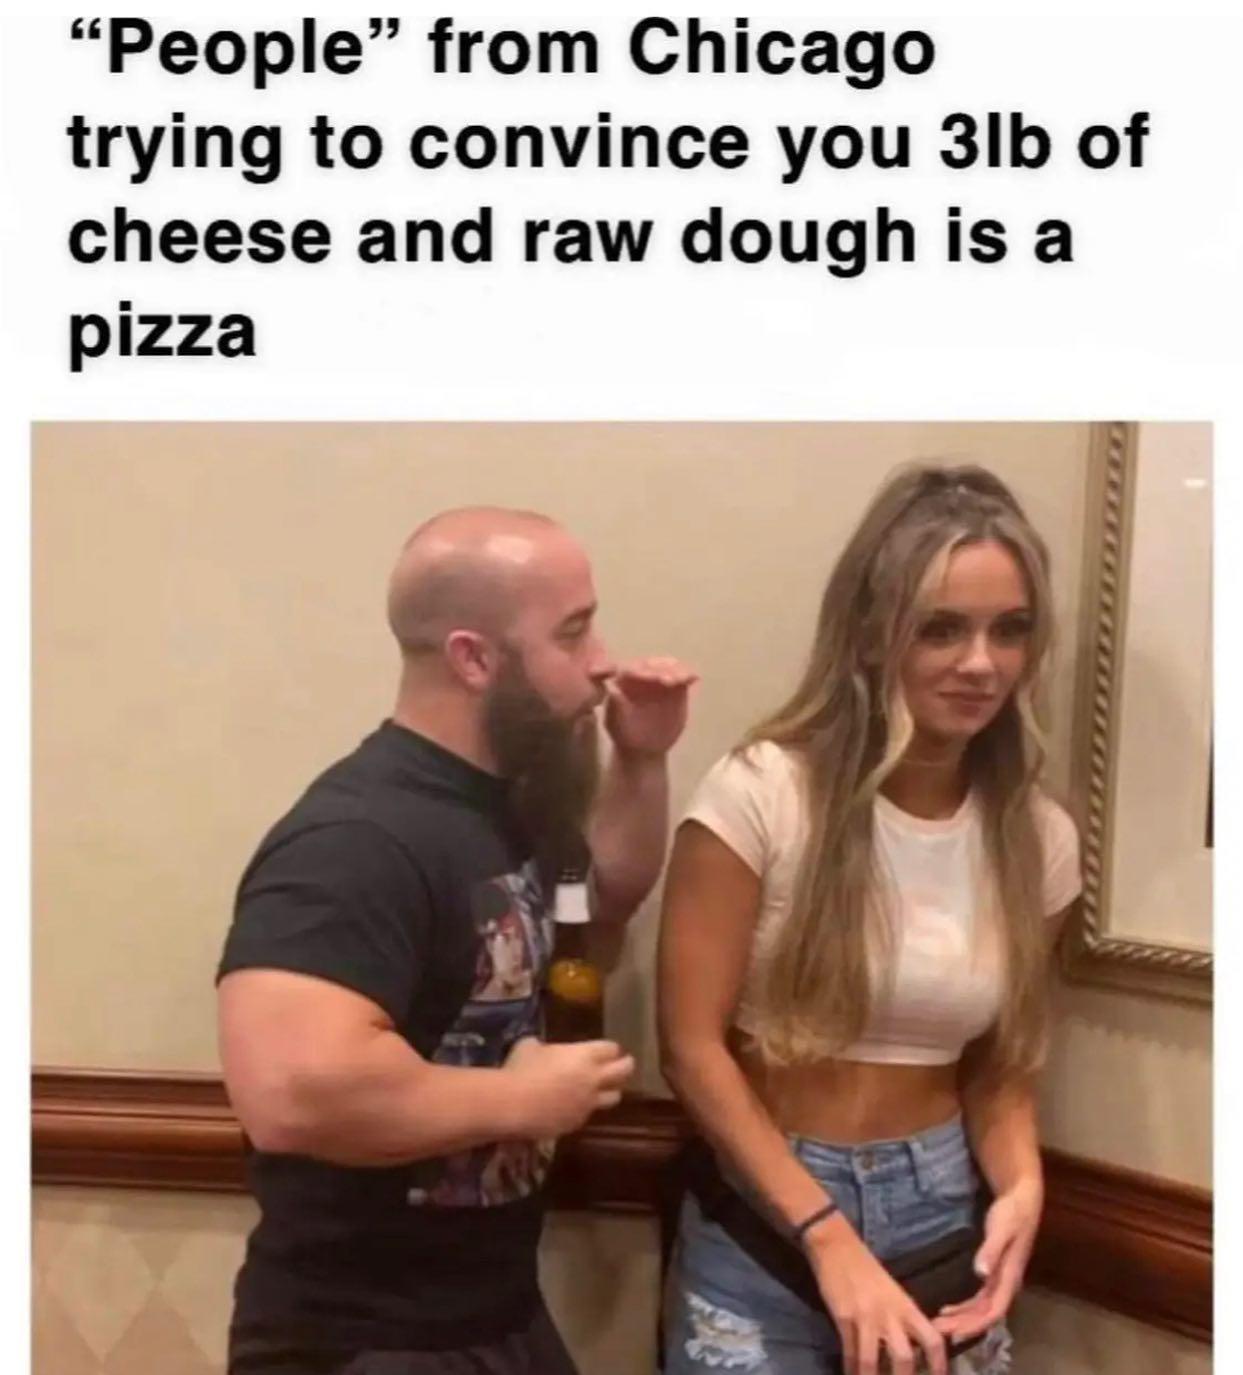 dank memes - chicago guy meme - "People" from Chicago trying to convince you 3lb of cheese and raw dough is a pizza